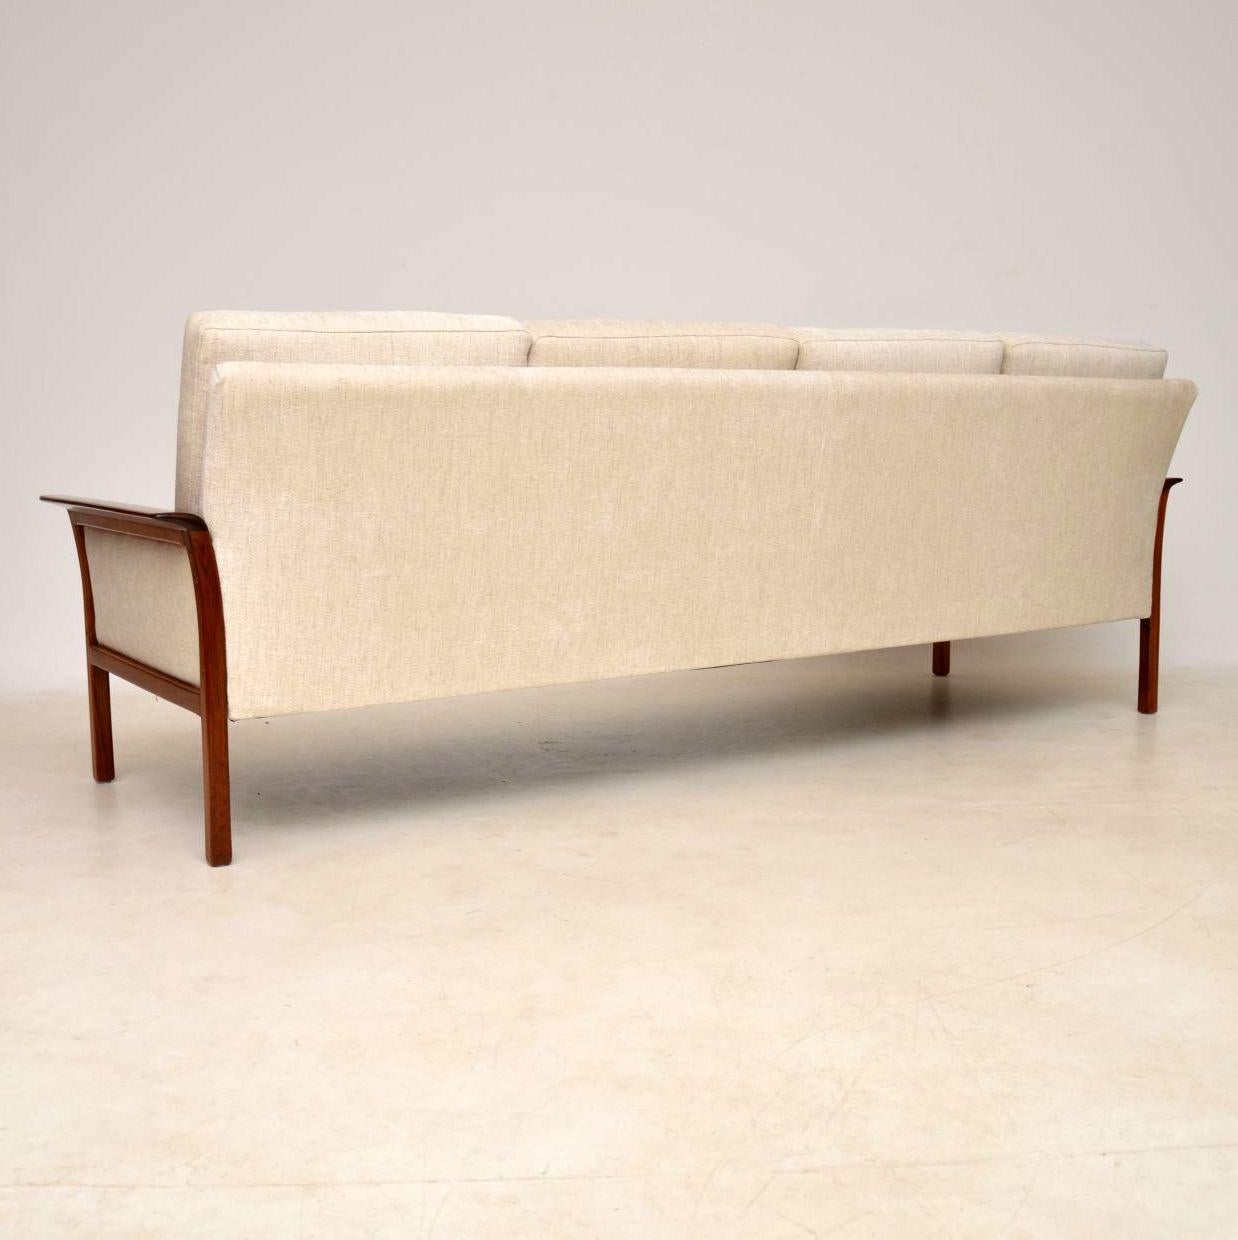 Mid-20th Century 1960s Scandinavian Sofa by Knut Saeter for Vatne Mobler